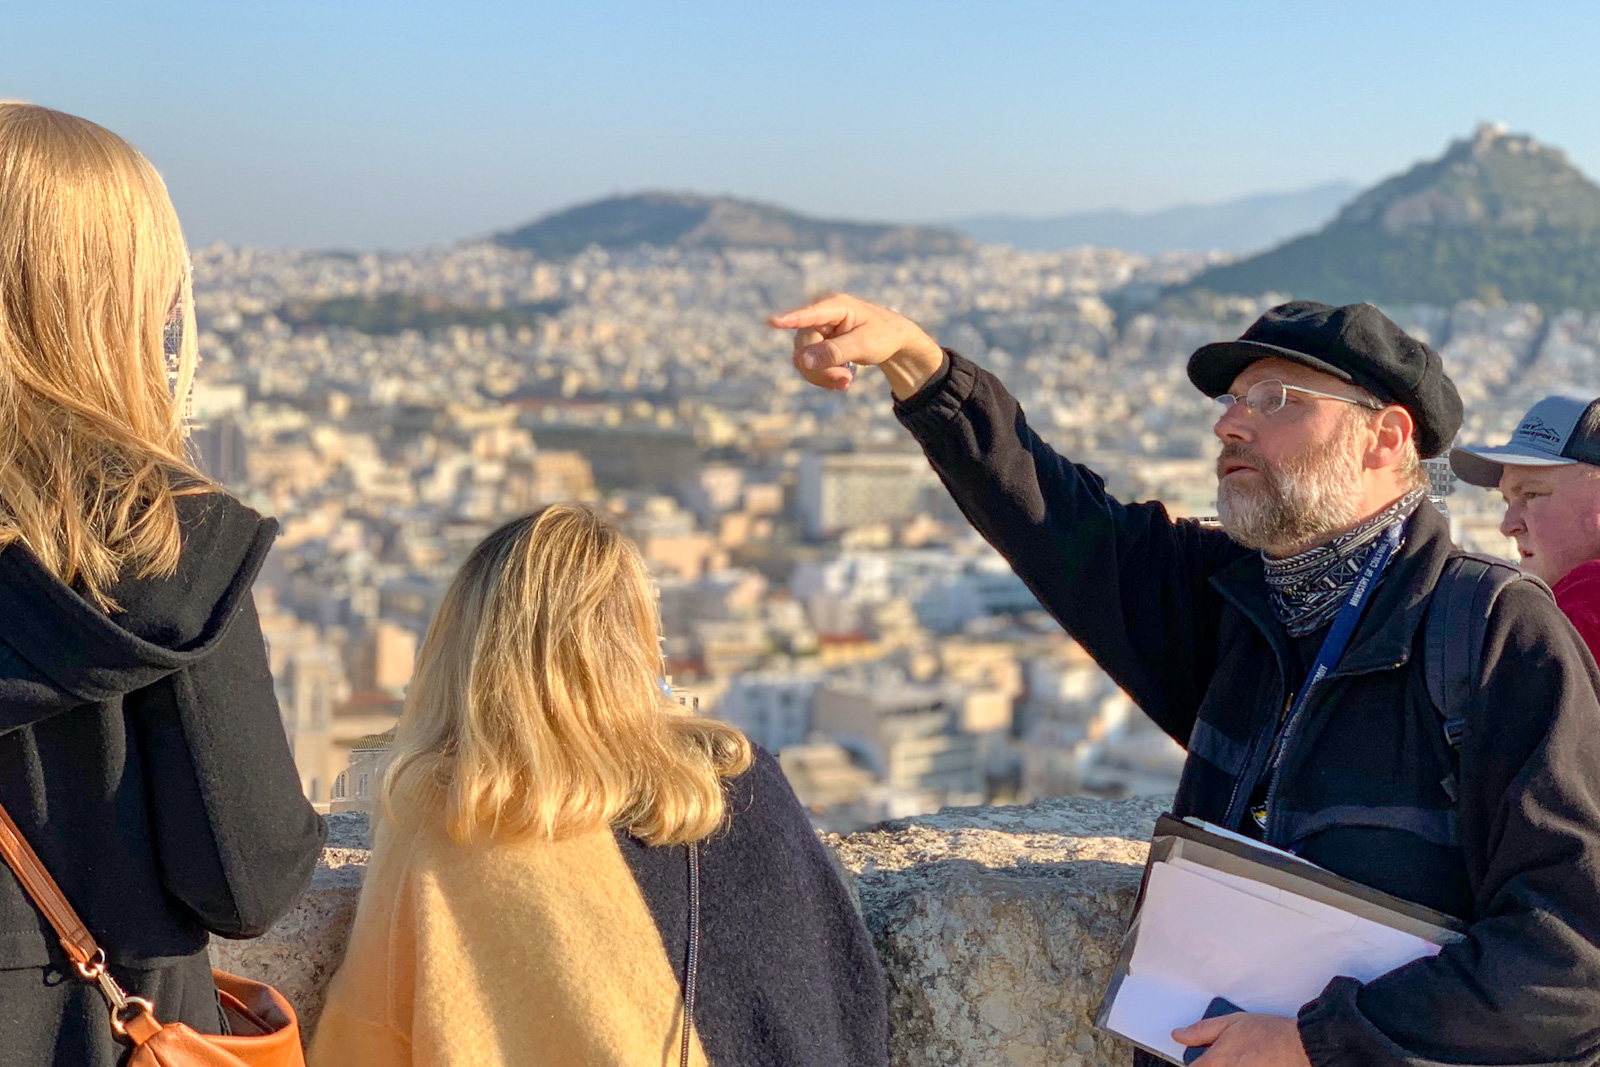 Tour guide in Athens, Greece, points out local landmarks from the top of a hill